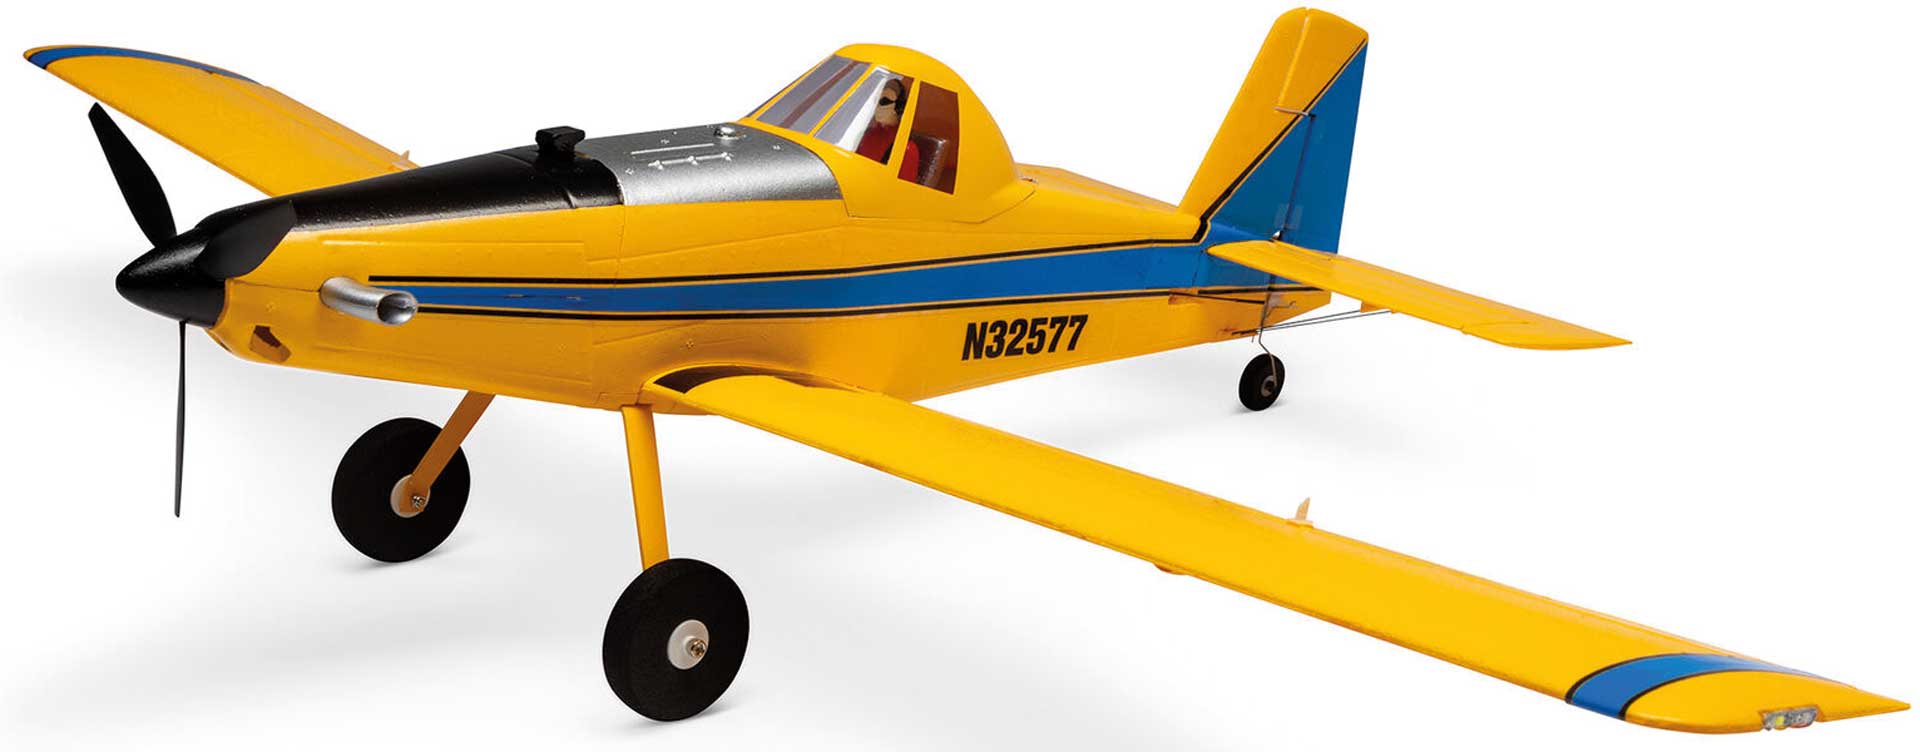 E-FLITE UMX Air Tractor BNF Basic w/ AS3X and SAFE